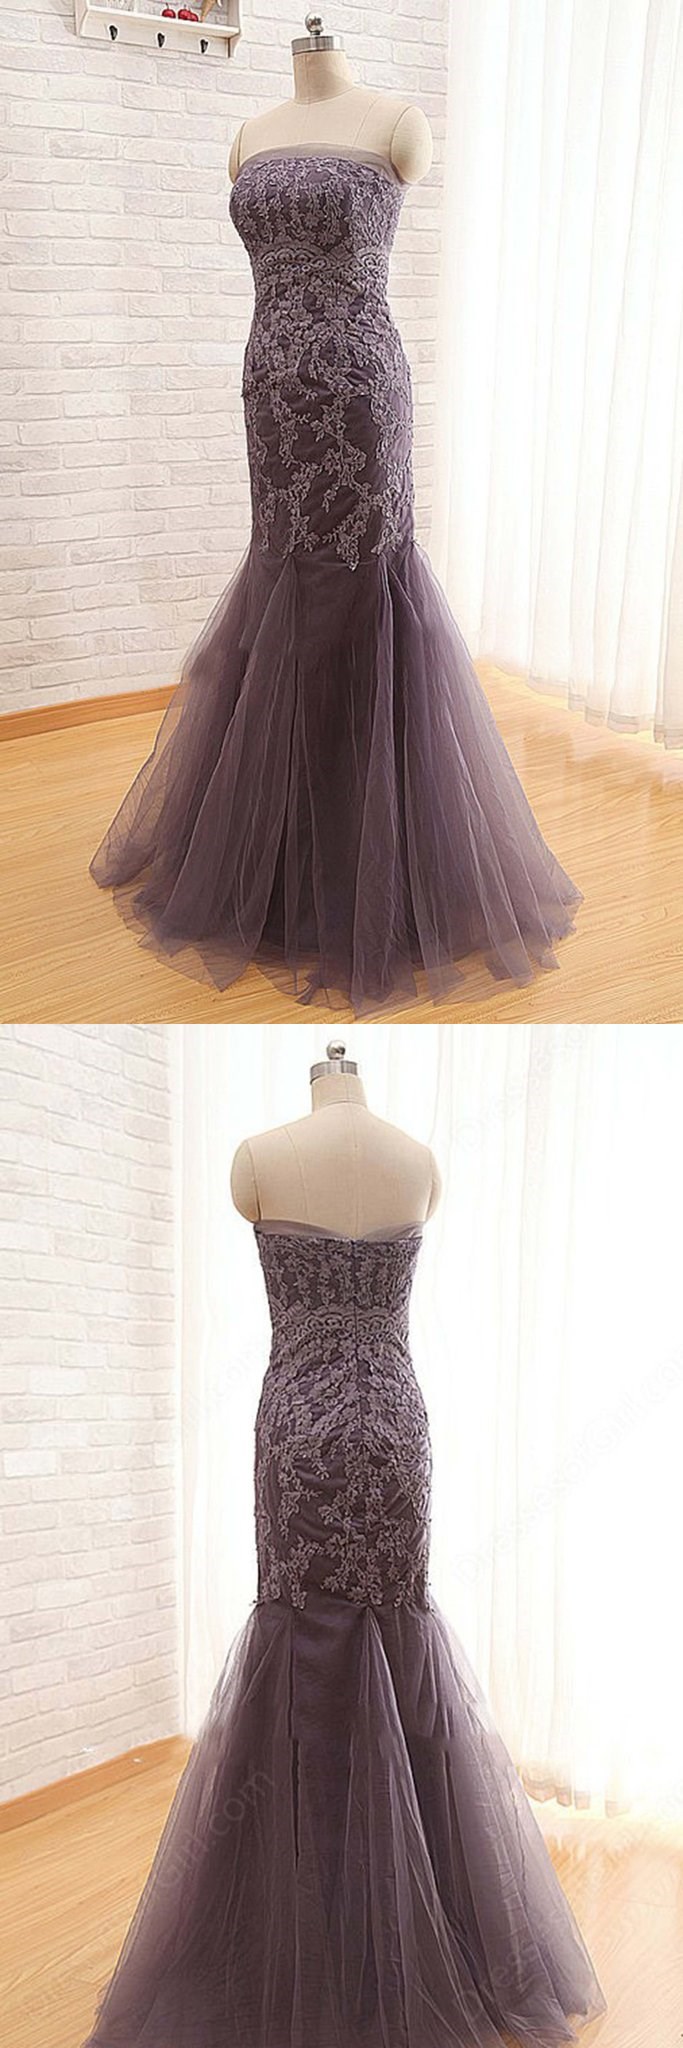 Tulle Lace Sweetheart Long Mermaid Dresses,long Dresses For Prom